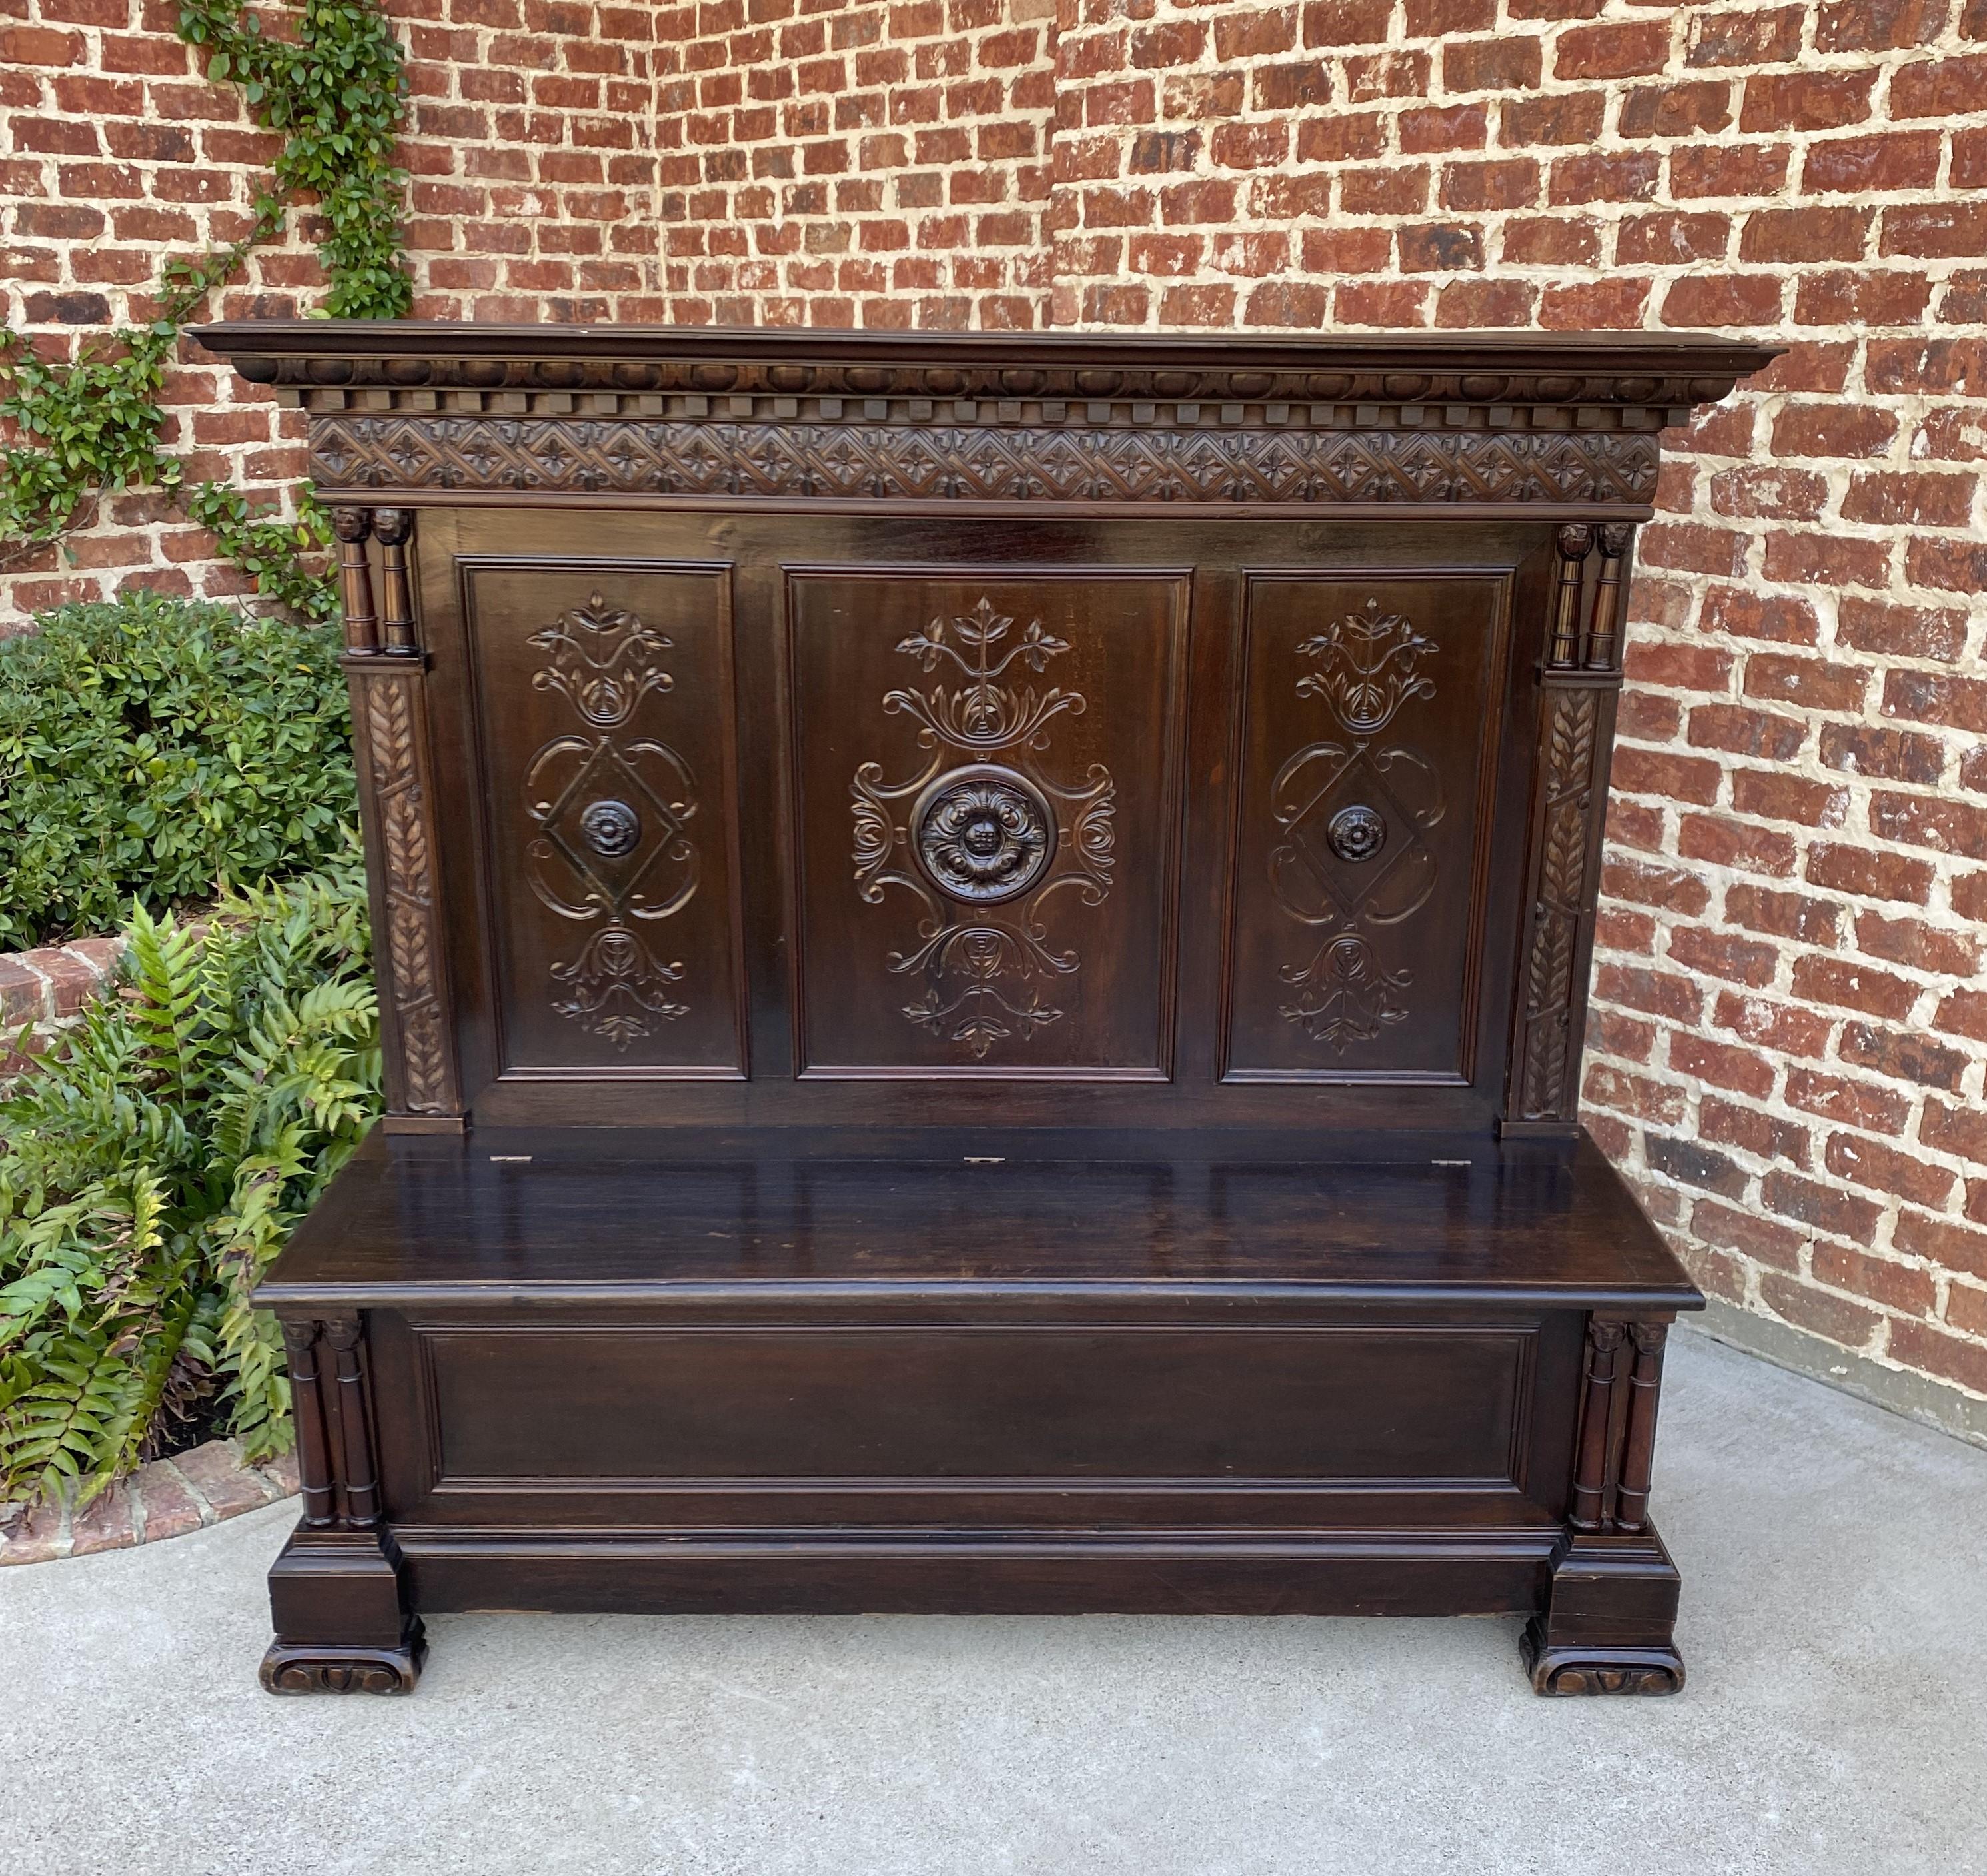 Carved Antique Italian Bench Settee Entry Hall Foyer Renaissance Revival Oak 19th C For Sale